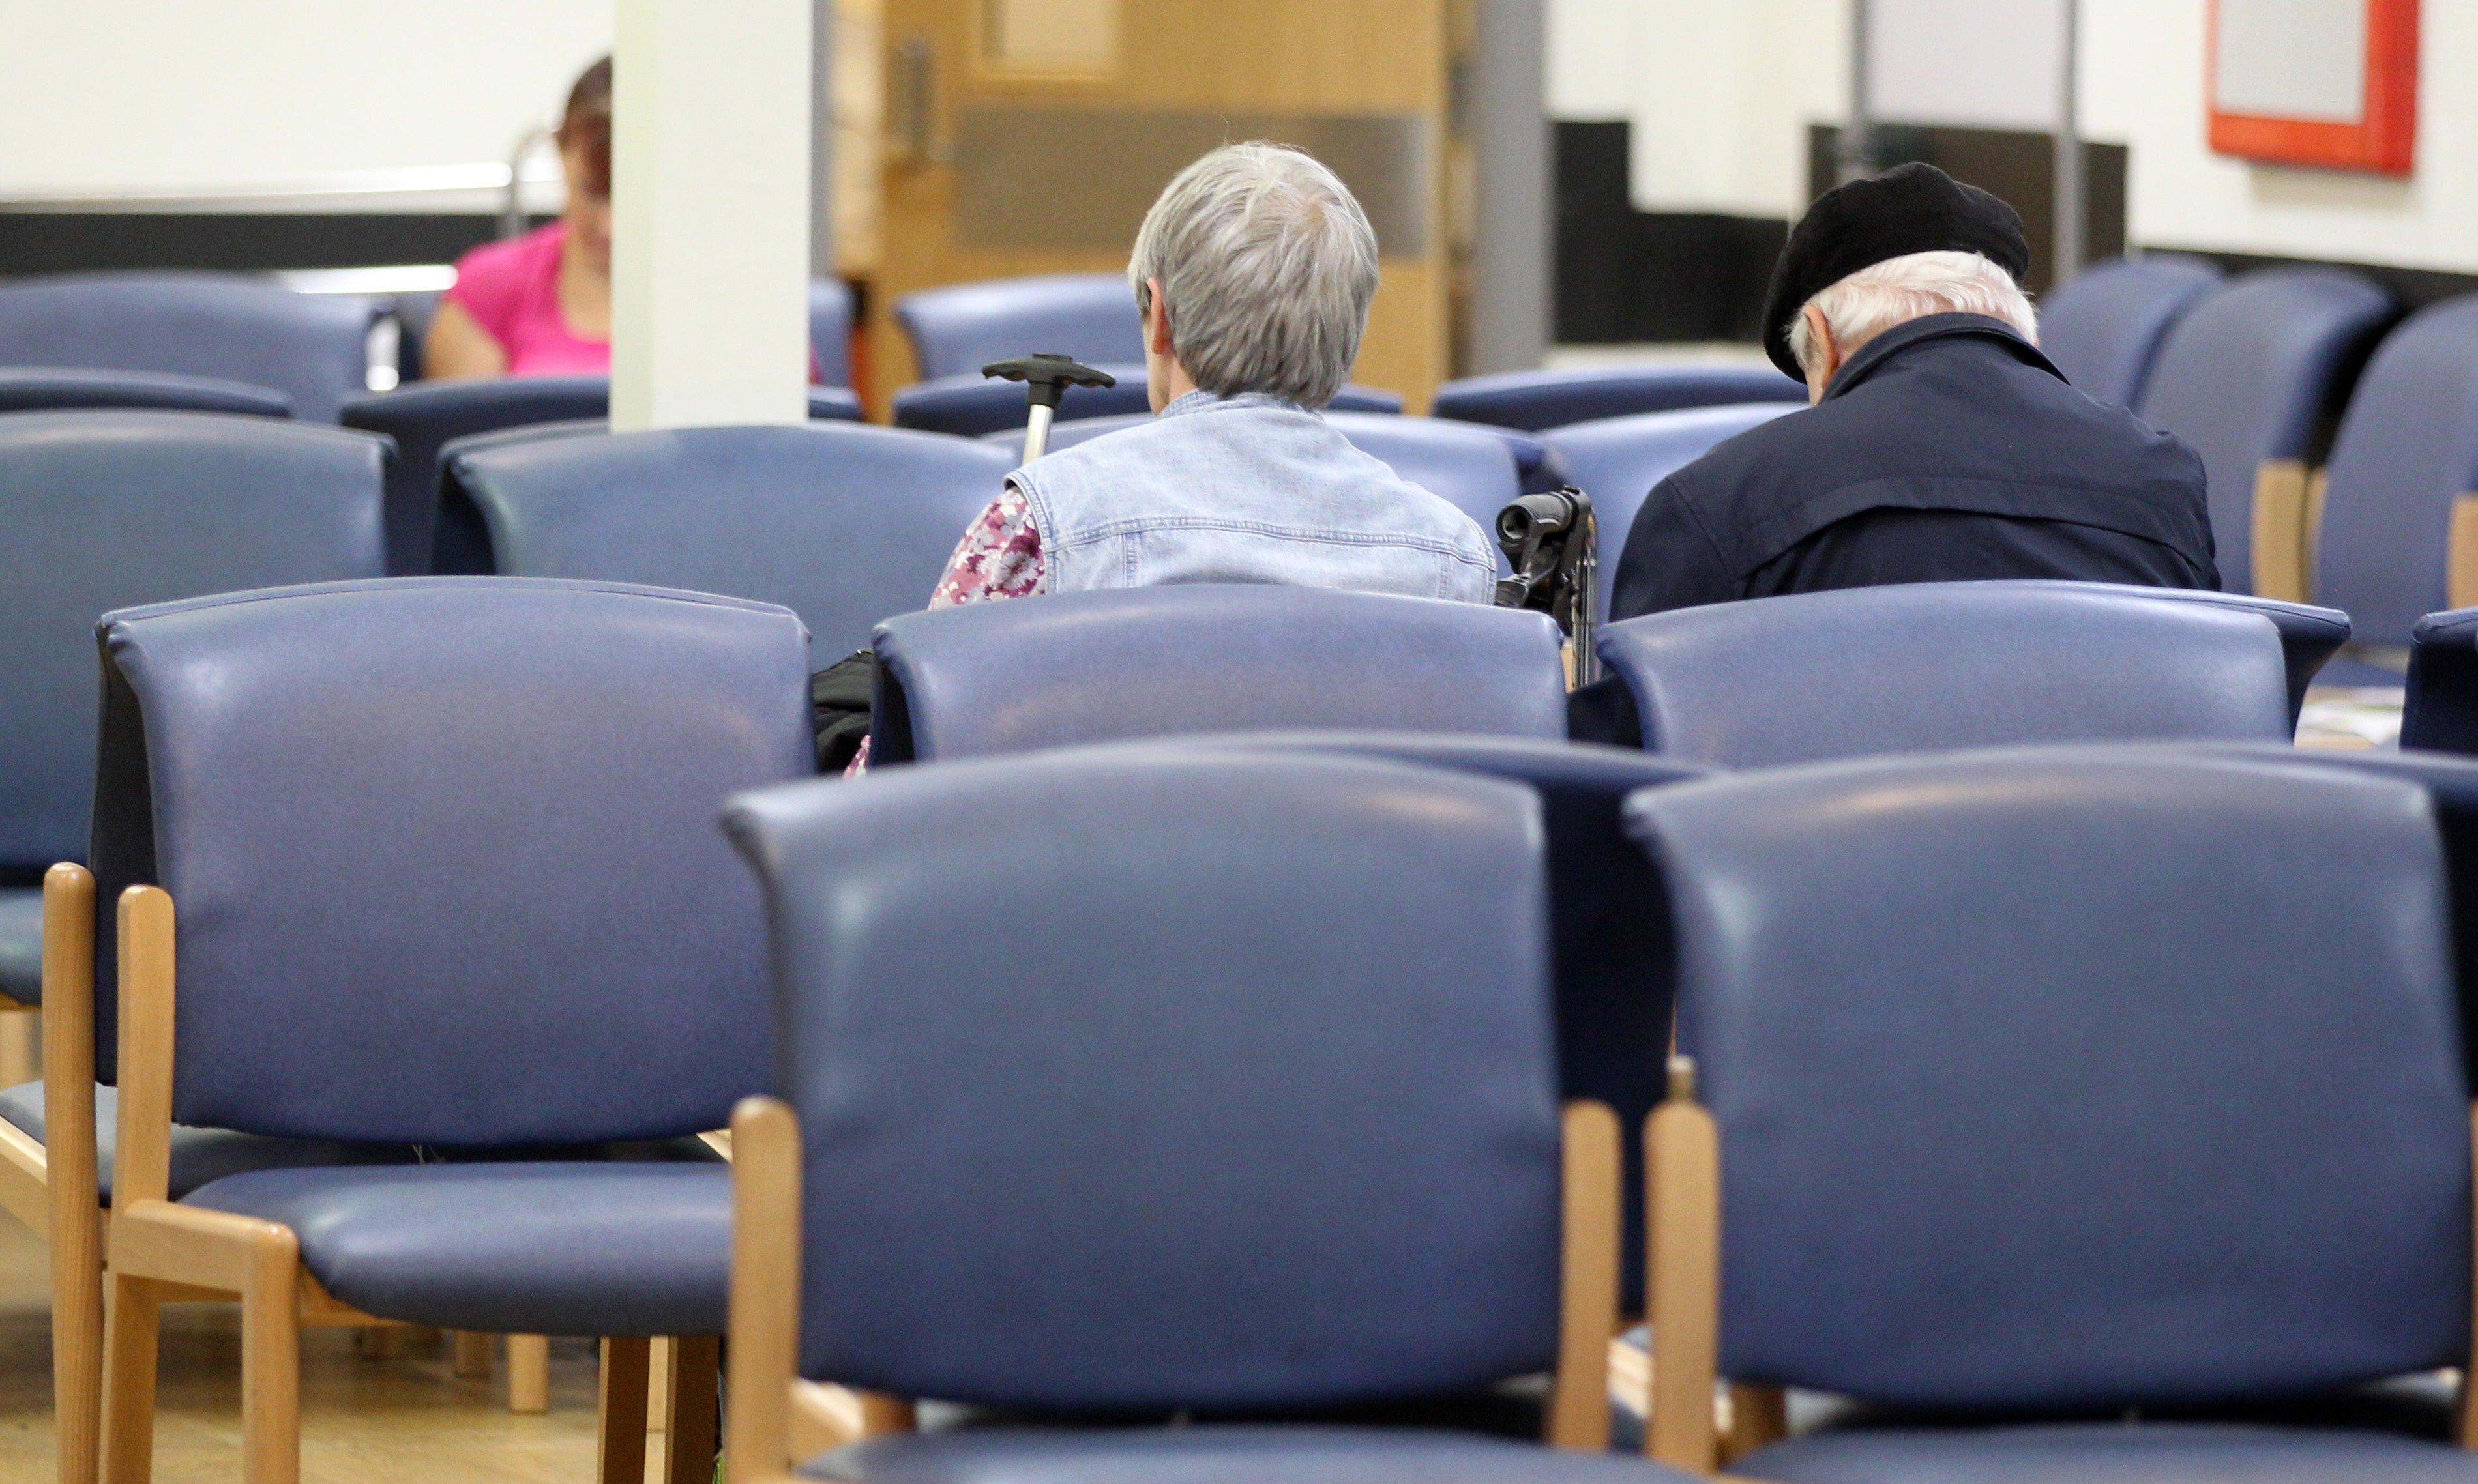 Patients in a hospital waiting room (Lynne Cameron/PA)